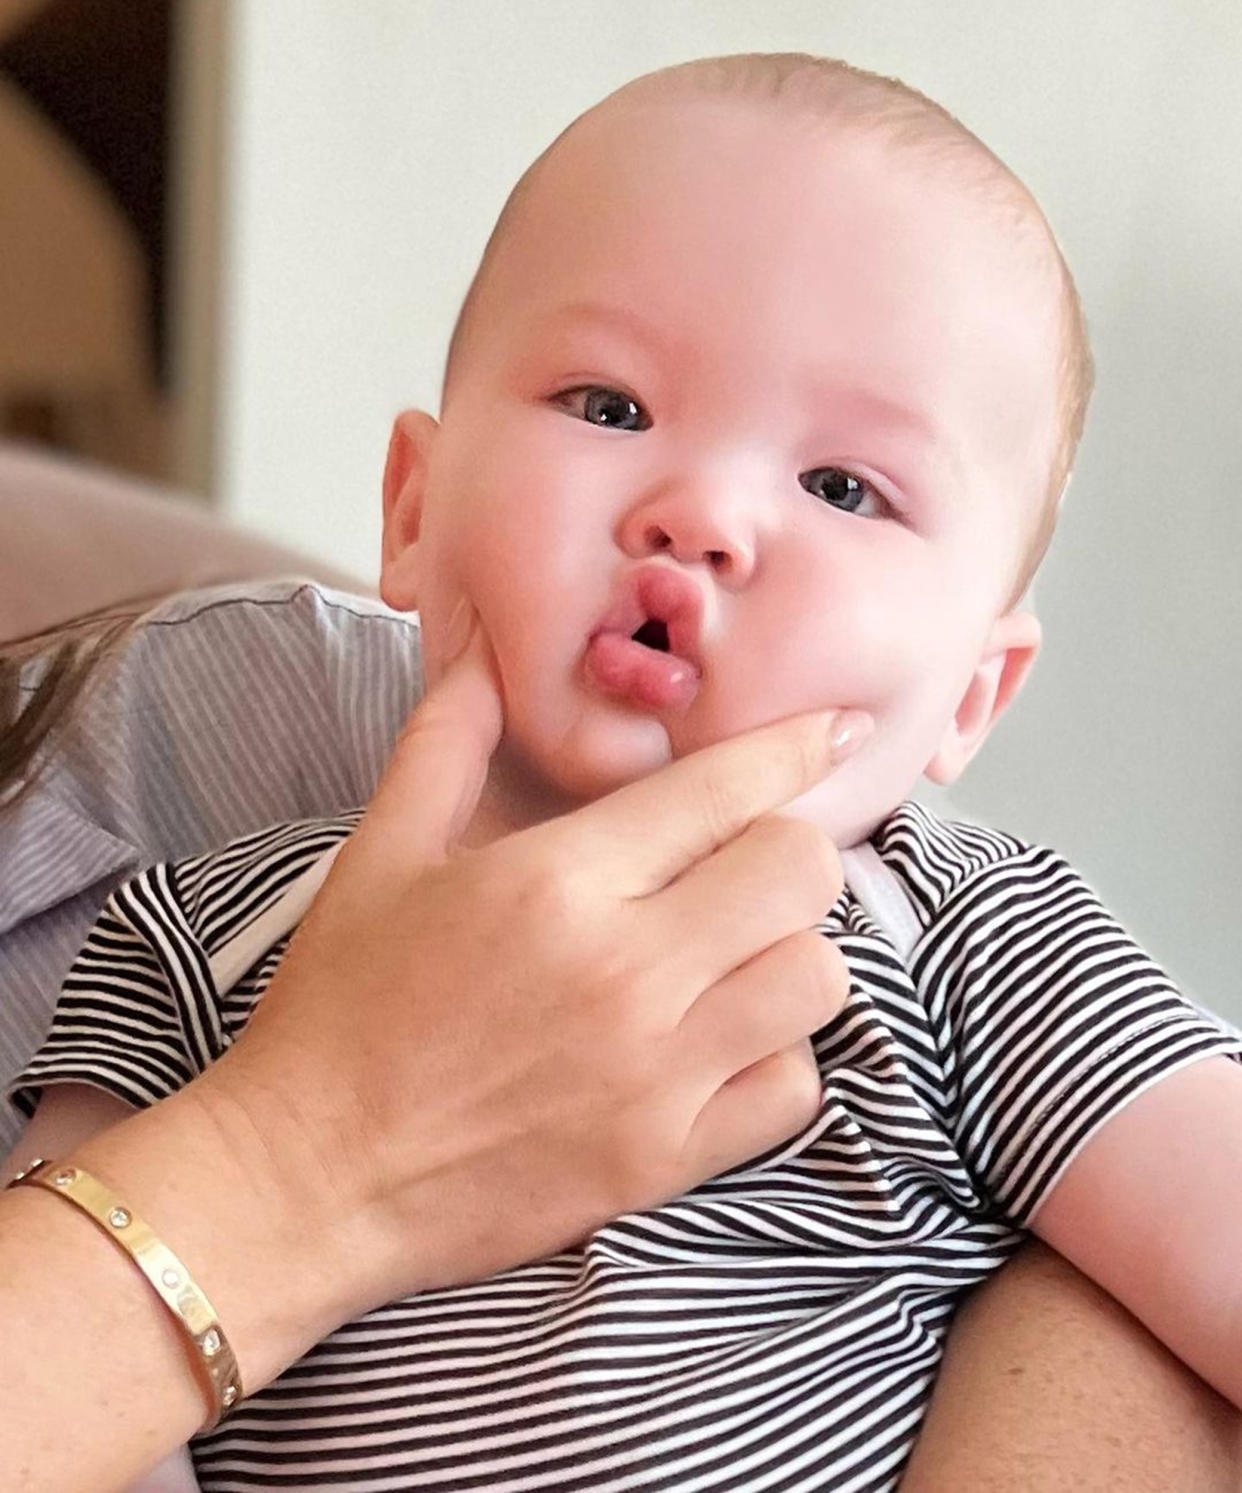 The comment section was flooded with fellow celebrities and fans gushing over baby Malcolm's sweet cheeks. (oliviamunn via Instagram)